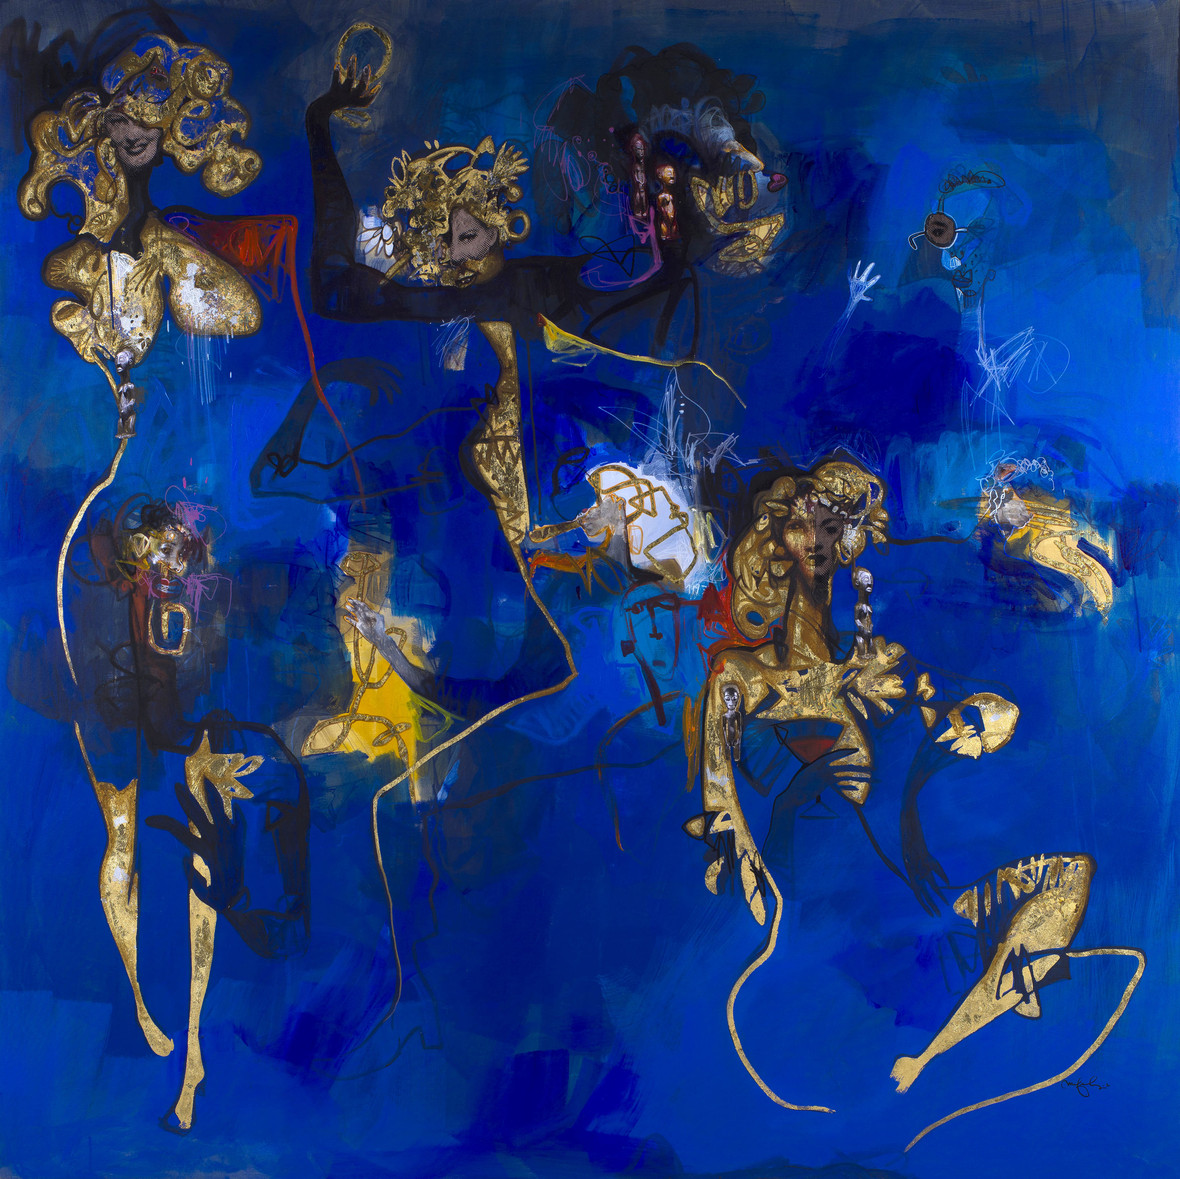 Papytsho Mafolo, Bleu, 2020. Mixed media on canvas. 200 x 200 cm. Presented by The Melrose Gallery. ENQUIRE.